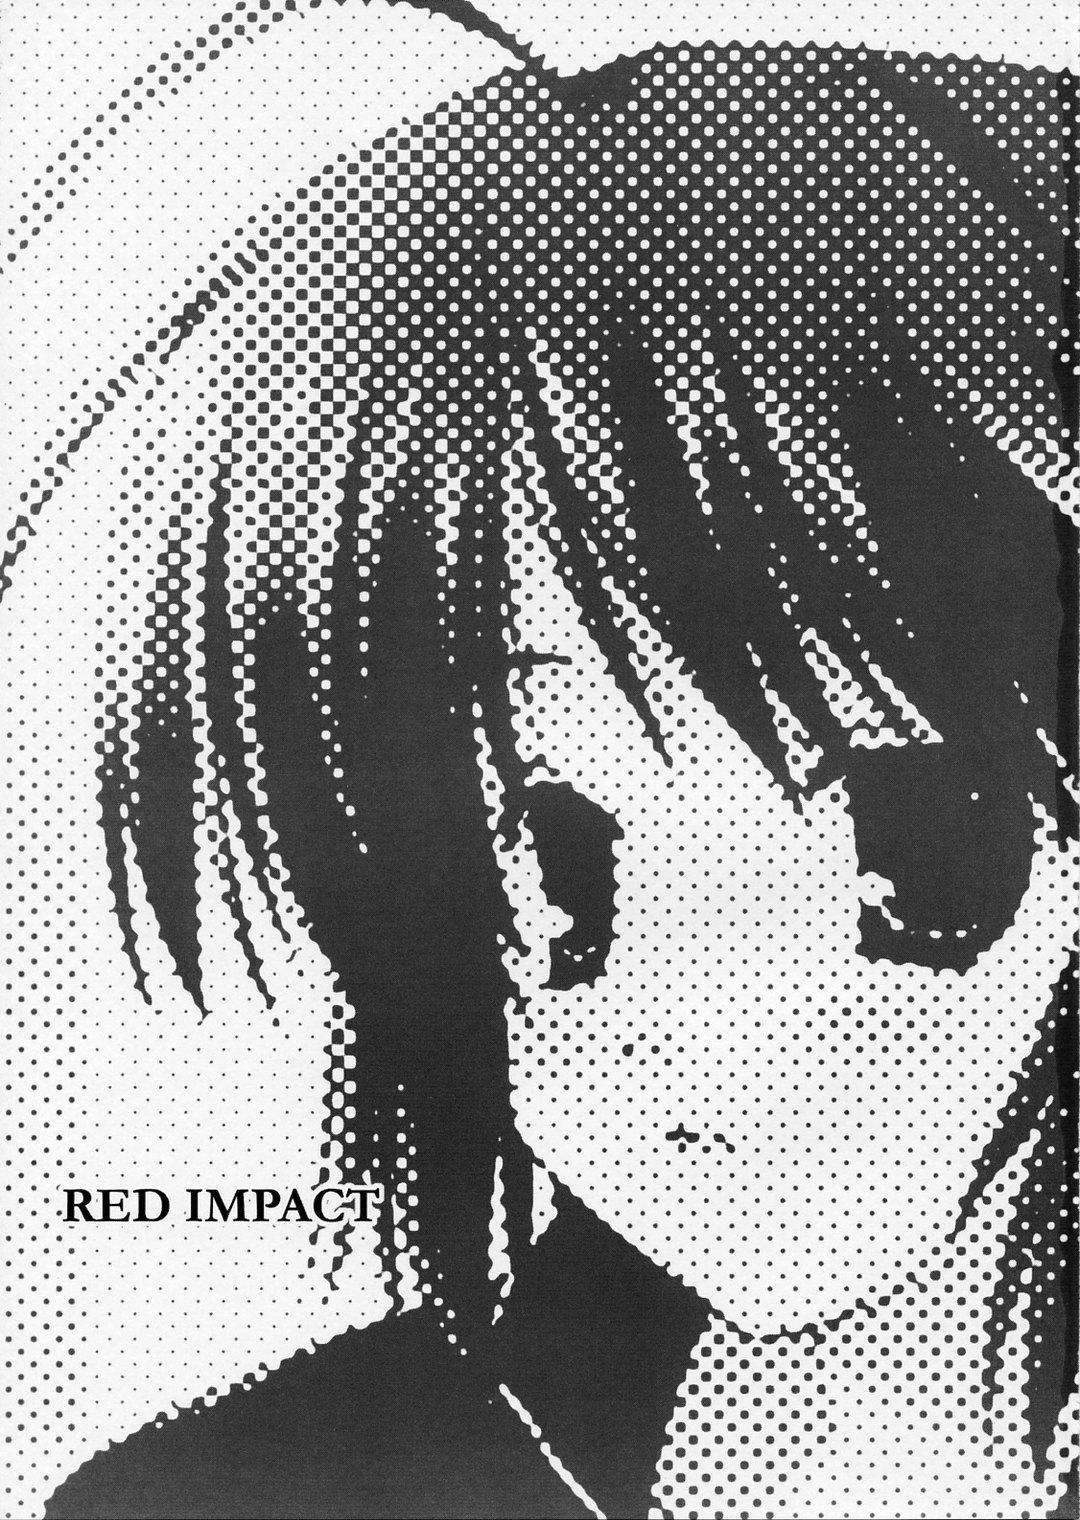 Soapy Red Impact - Gundam seed destiny Gad guard Gostosa - Page 2